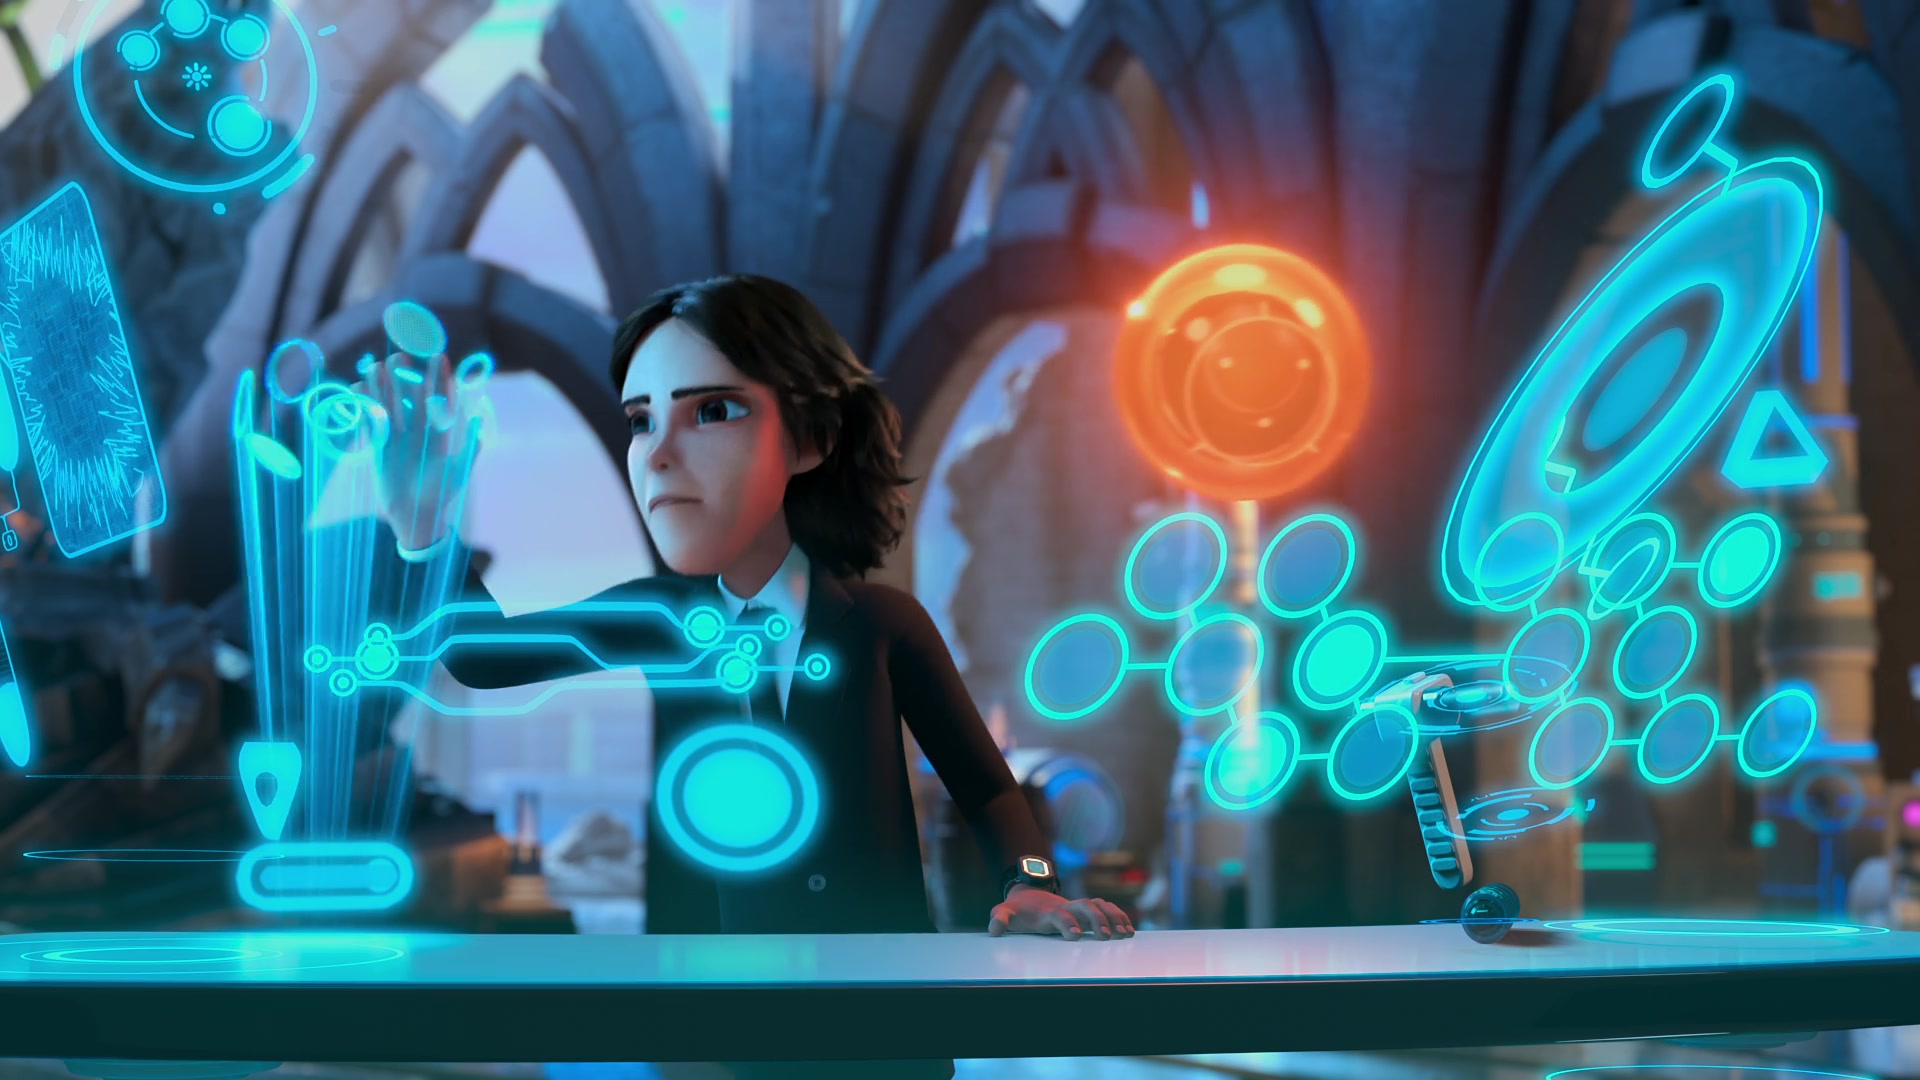 Trollhunters Rise Of The Titans 2021 Wallpapers